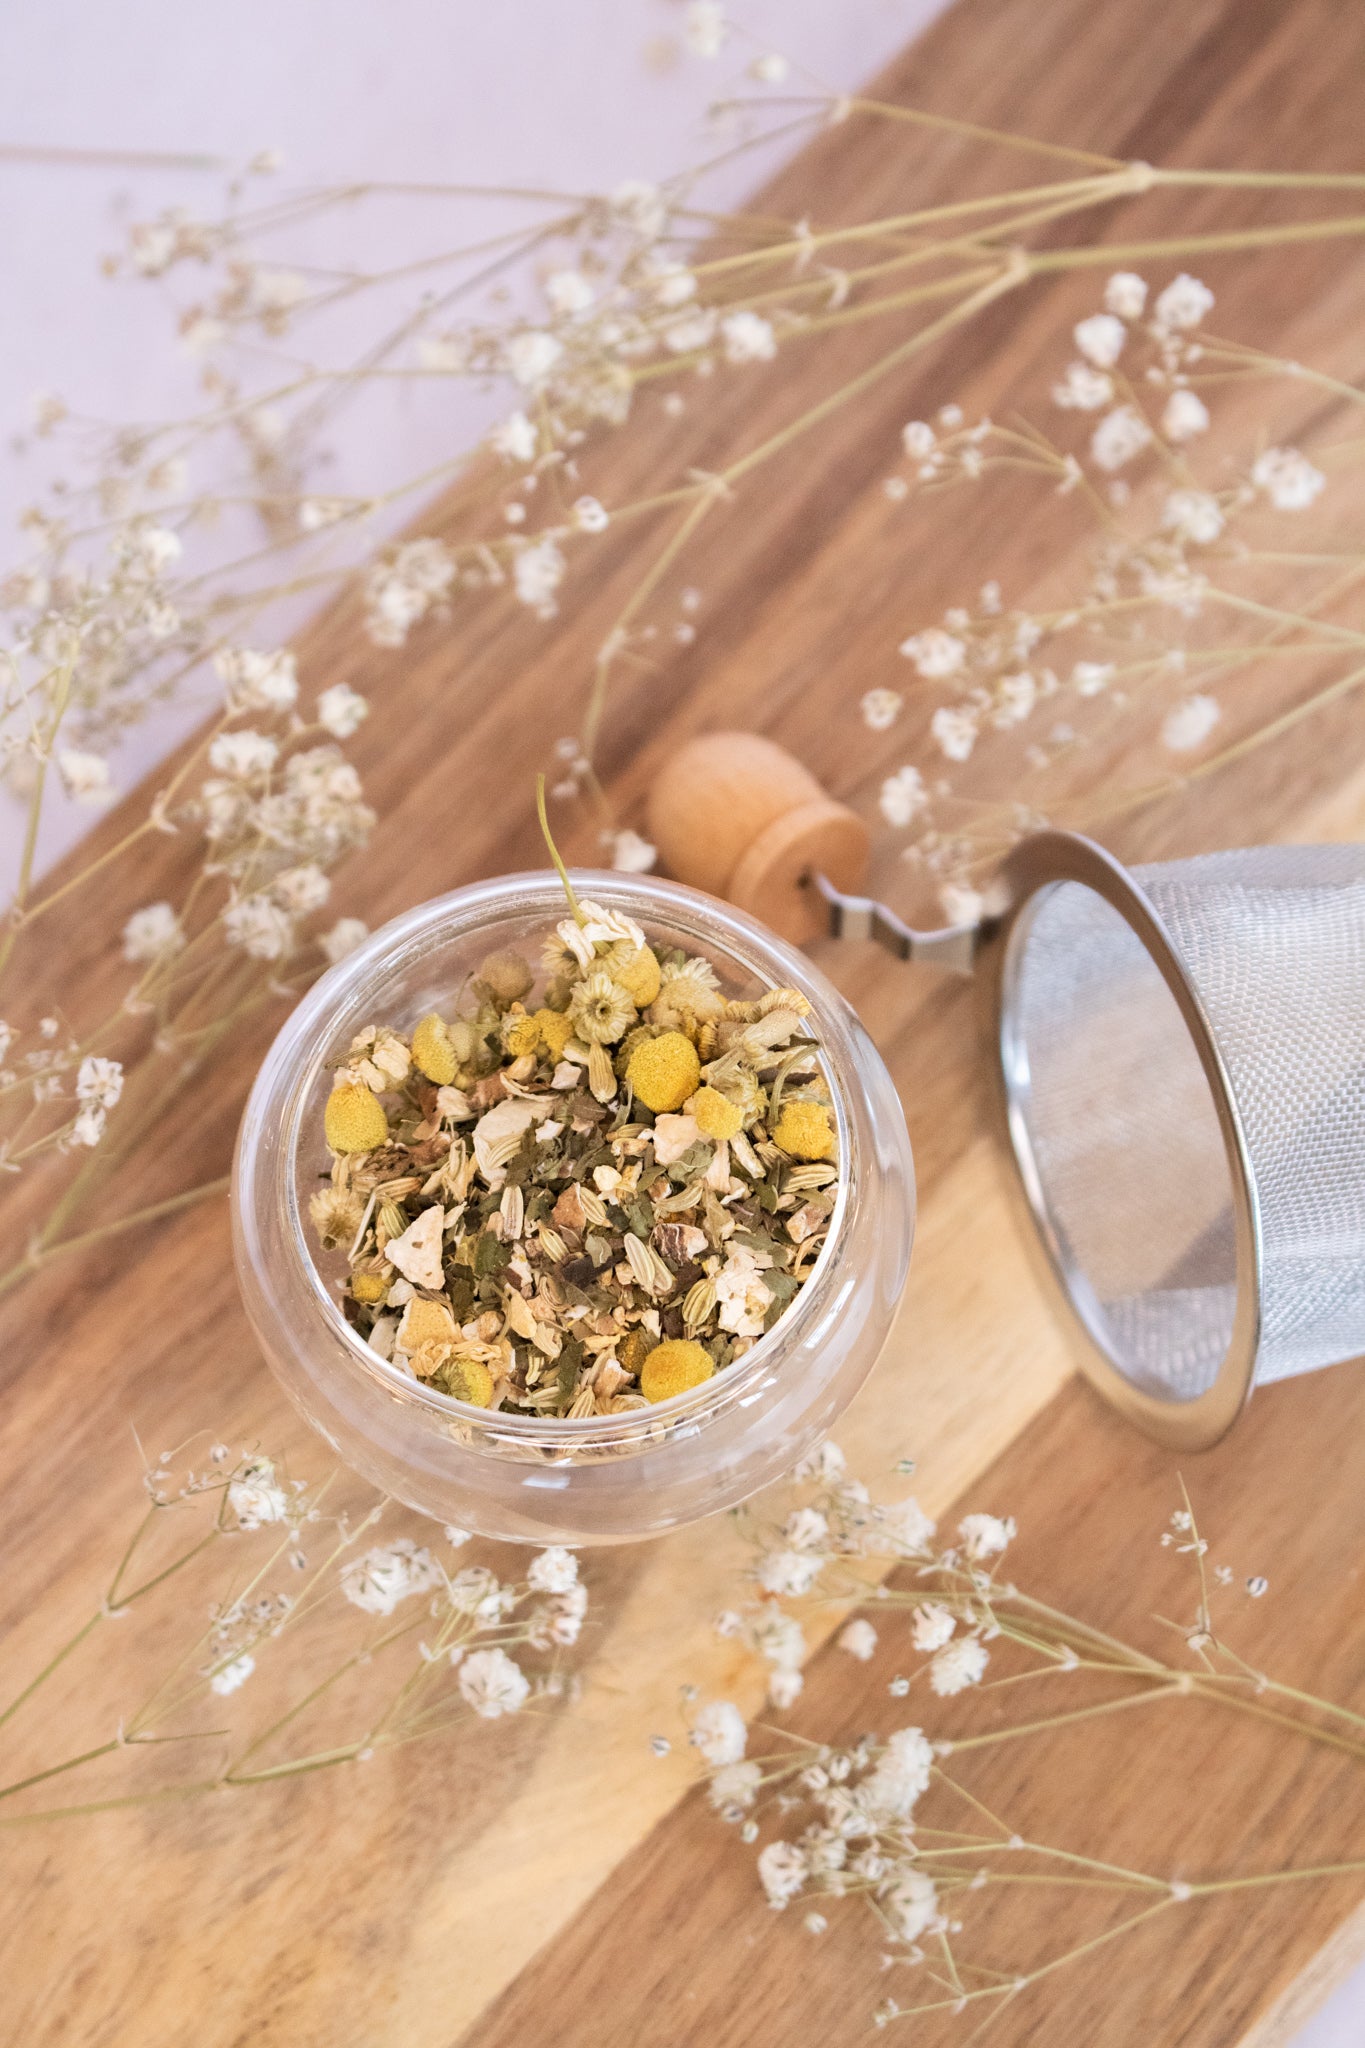 Our Love Your Gut herbal tea blend has been formulated to help you nourish your gut in a way that is simple and effective.Our Love Your Gut herbal tea blend has been formulated to help you nourish your gut in a way that is simple and effective.